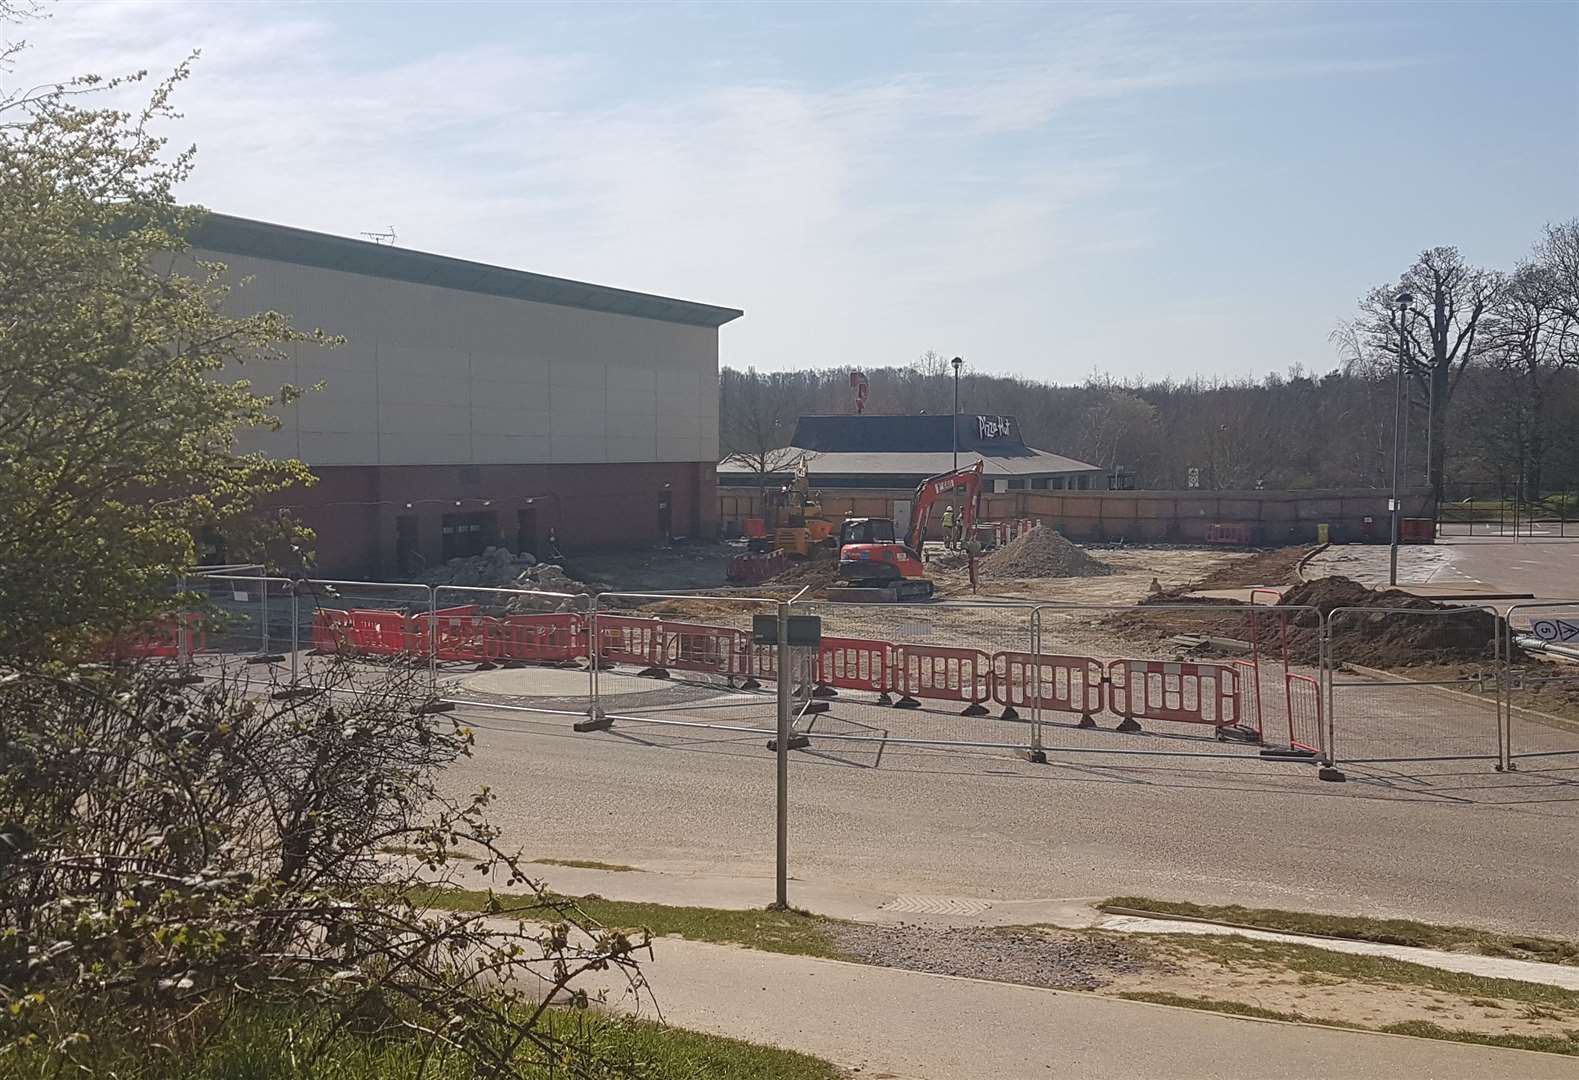 Contractors were seen working on the site yesterday